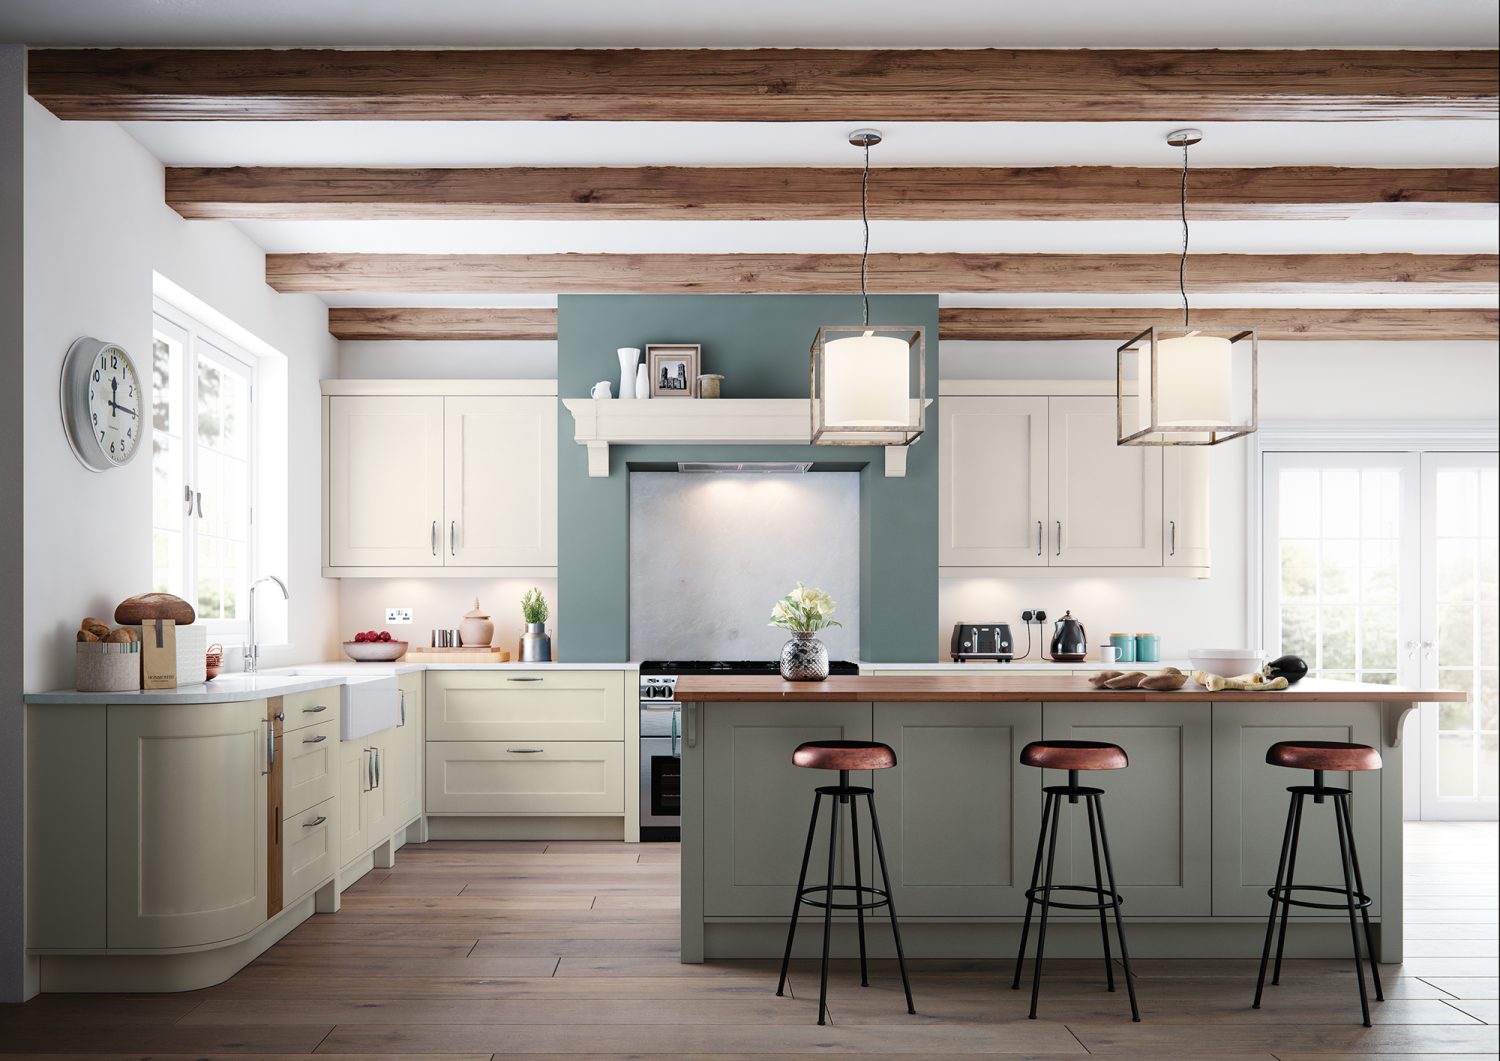 Fiorenza Shaker Kitchen door in Stone & Porceain is showcased in this kitchen design, showing the doors in a kitchen design created by The Kitchen Depot. The kitchen has wooden beams and copper stools, giving a modern country feel